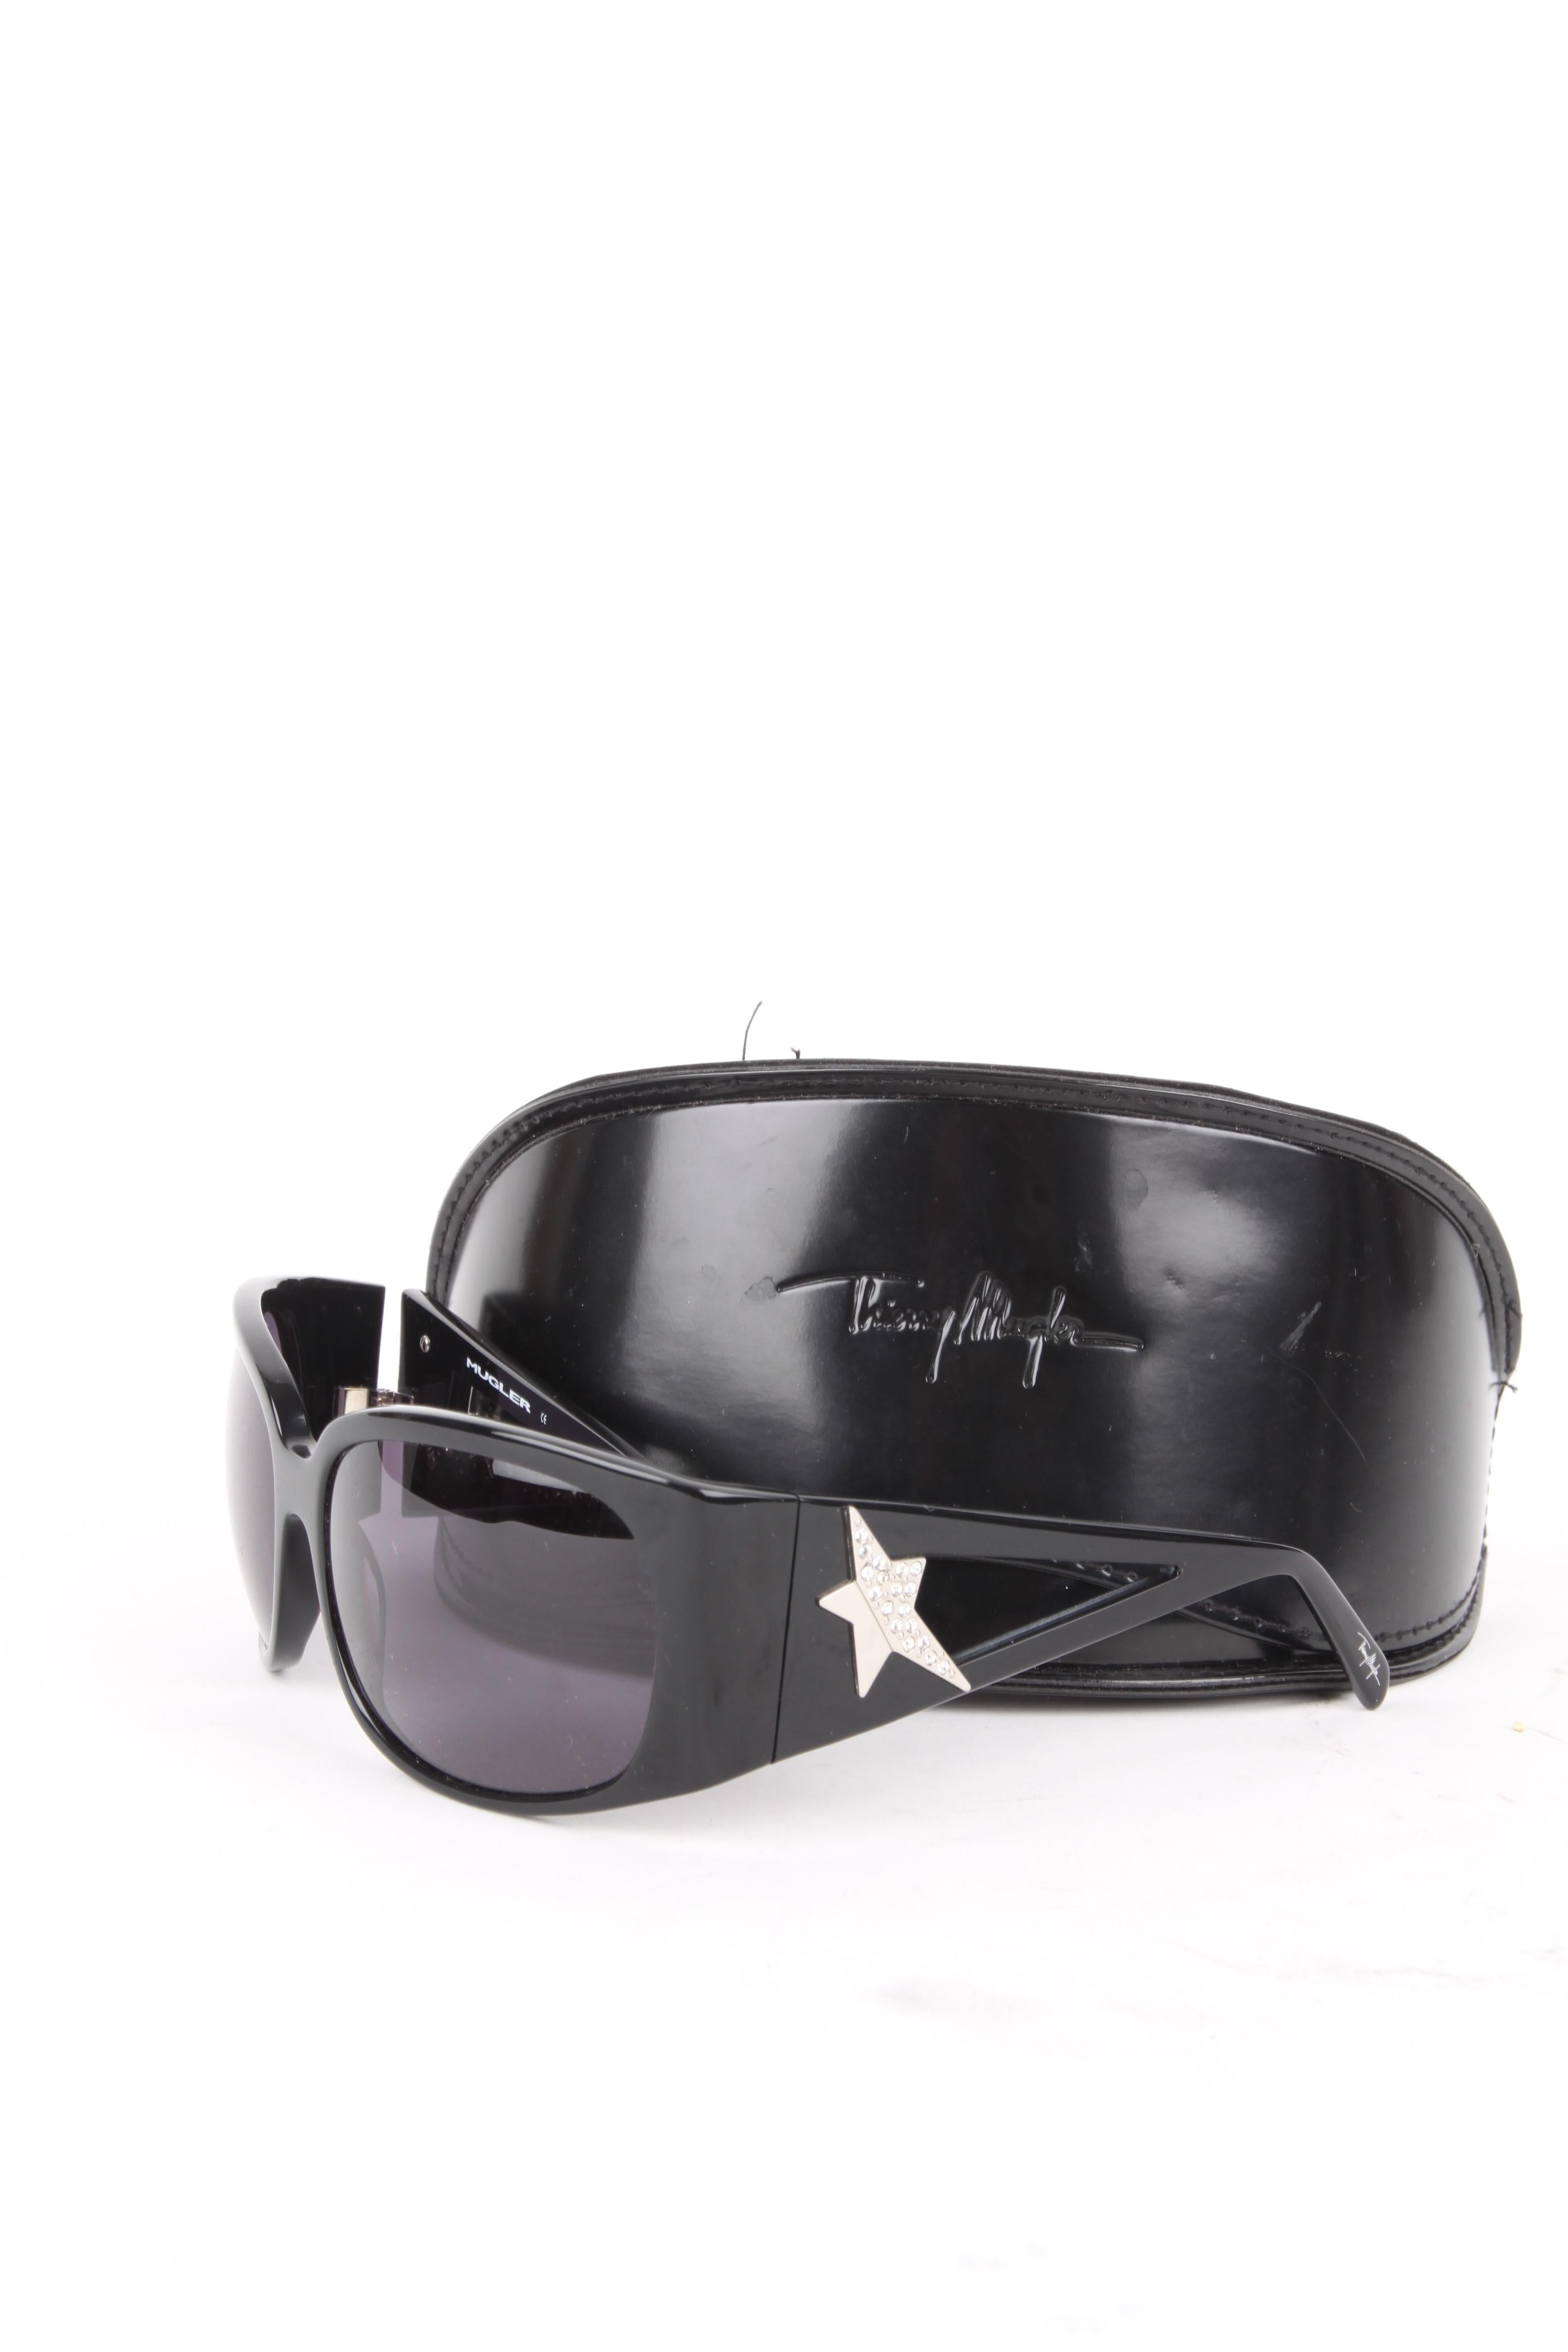 Thierry Mugler Black Lucite Star Swarovski Rhinestone Embellished Sunglasses.

These Thierry Mugler sunglasses have a retro but chic appeal. They feature a swarovski rhinestone embellished detail on the frames and an openweork frame design and